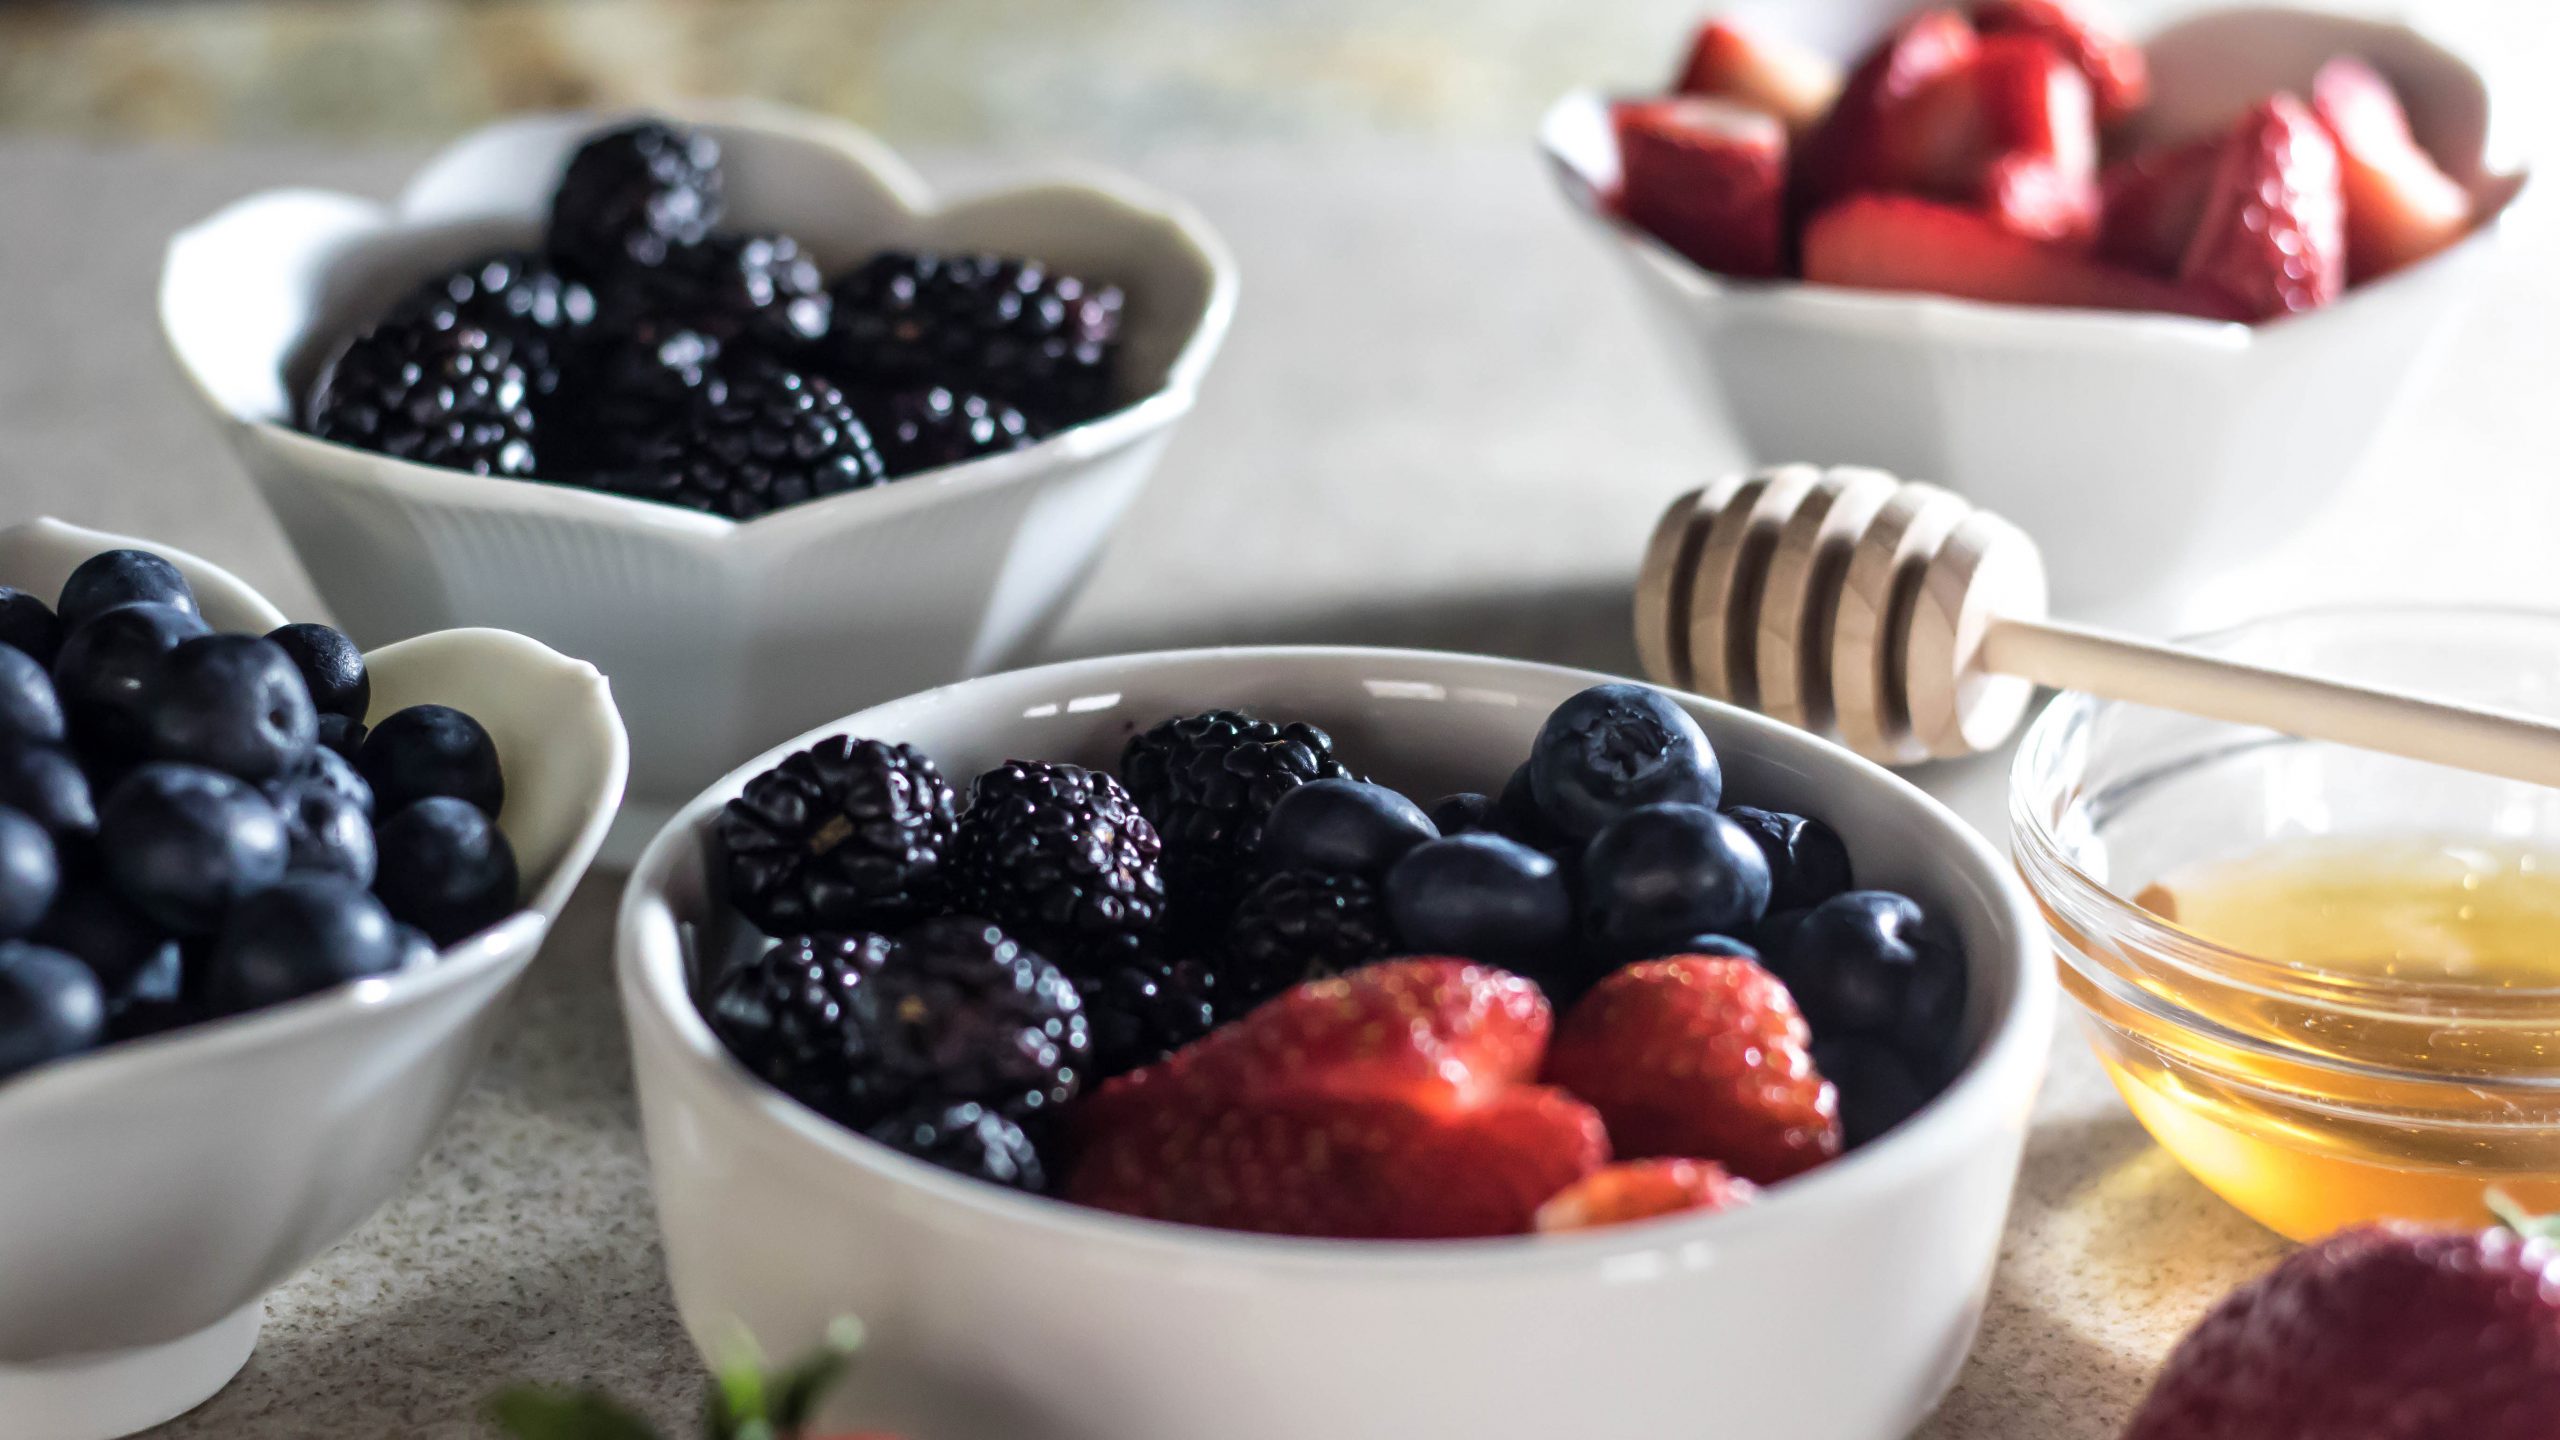 Fresh berries, whole cream, and raw honey make this simple treat delectable.